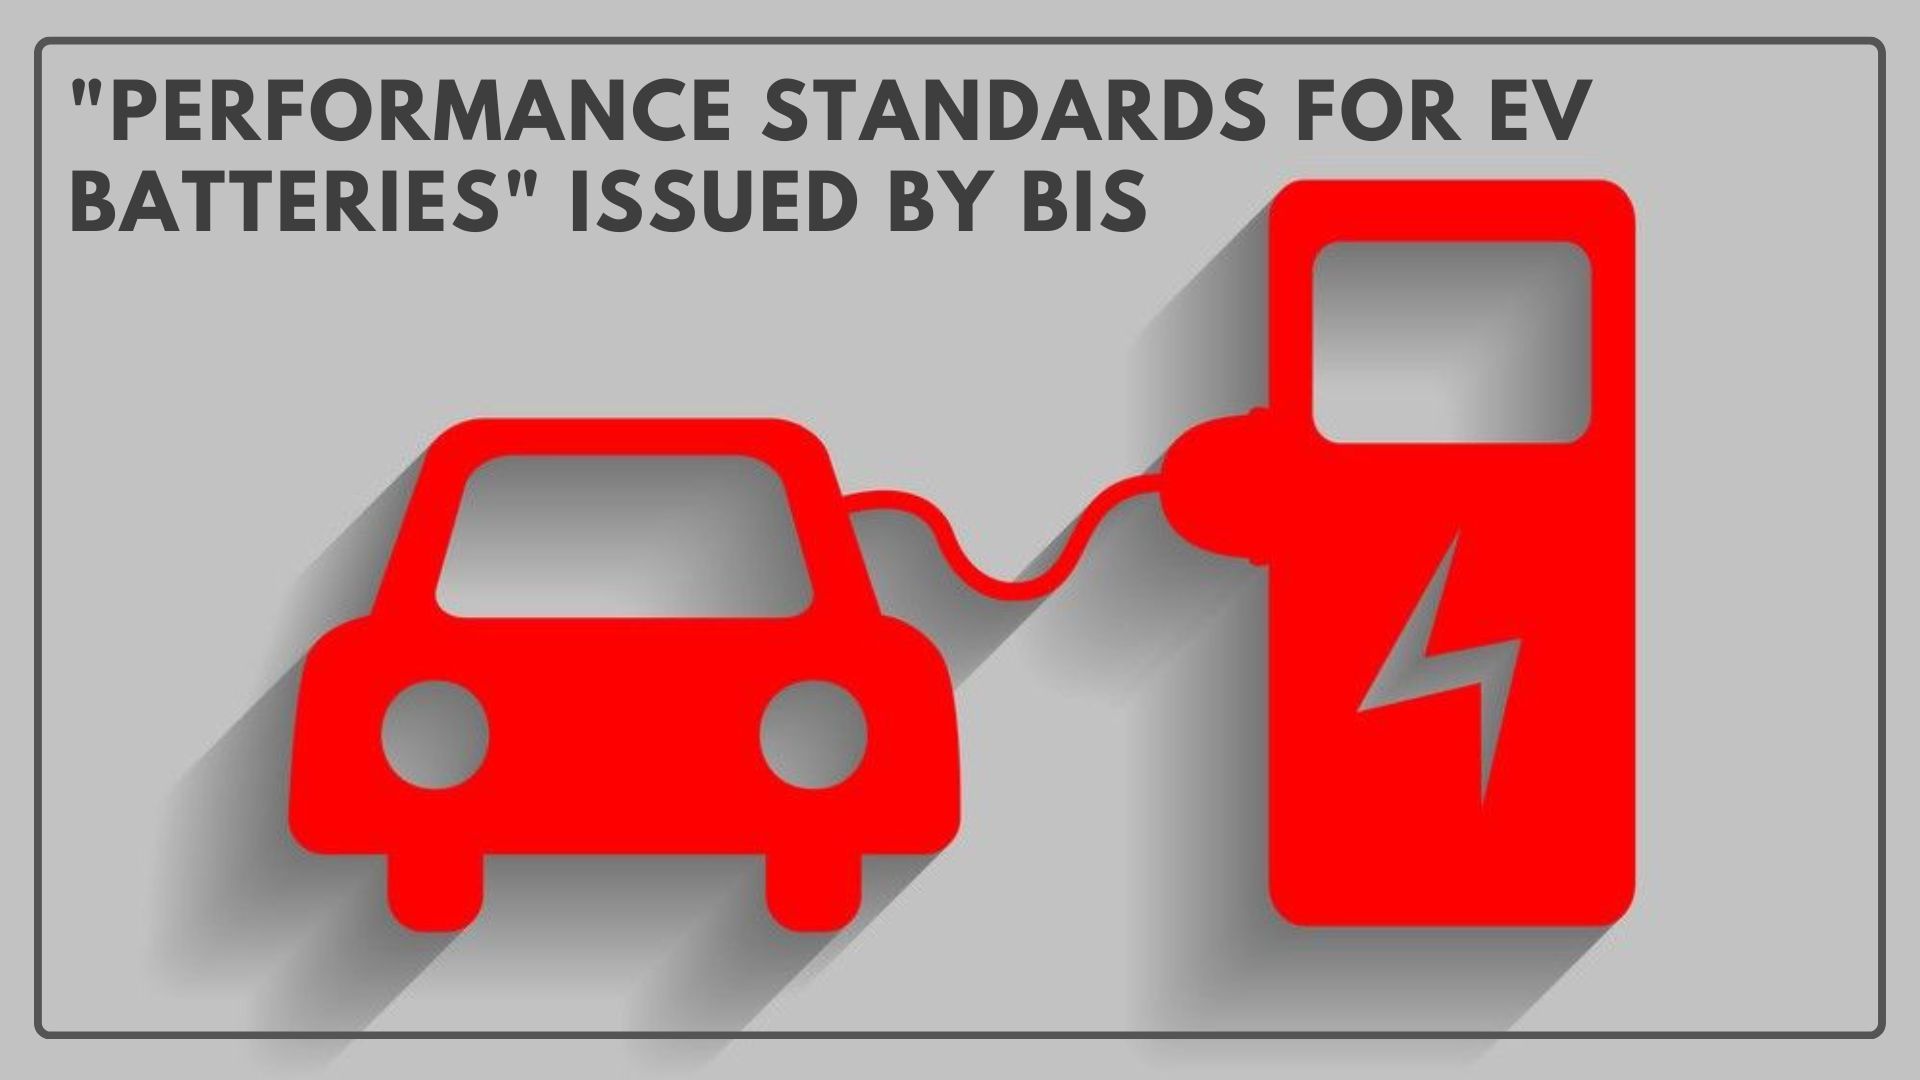 https://e-vehicleinfo.com/performance-standards-for-electric-vehicle-batteries-issued-by-bis/